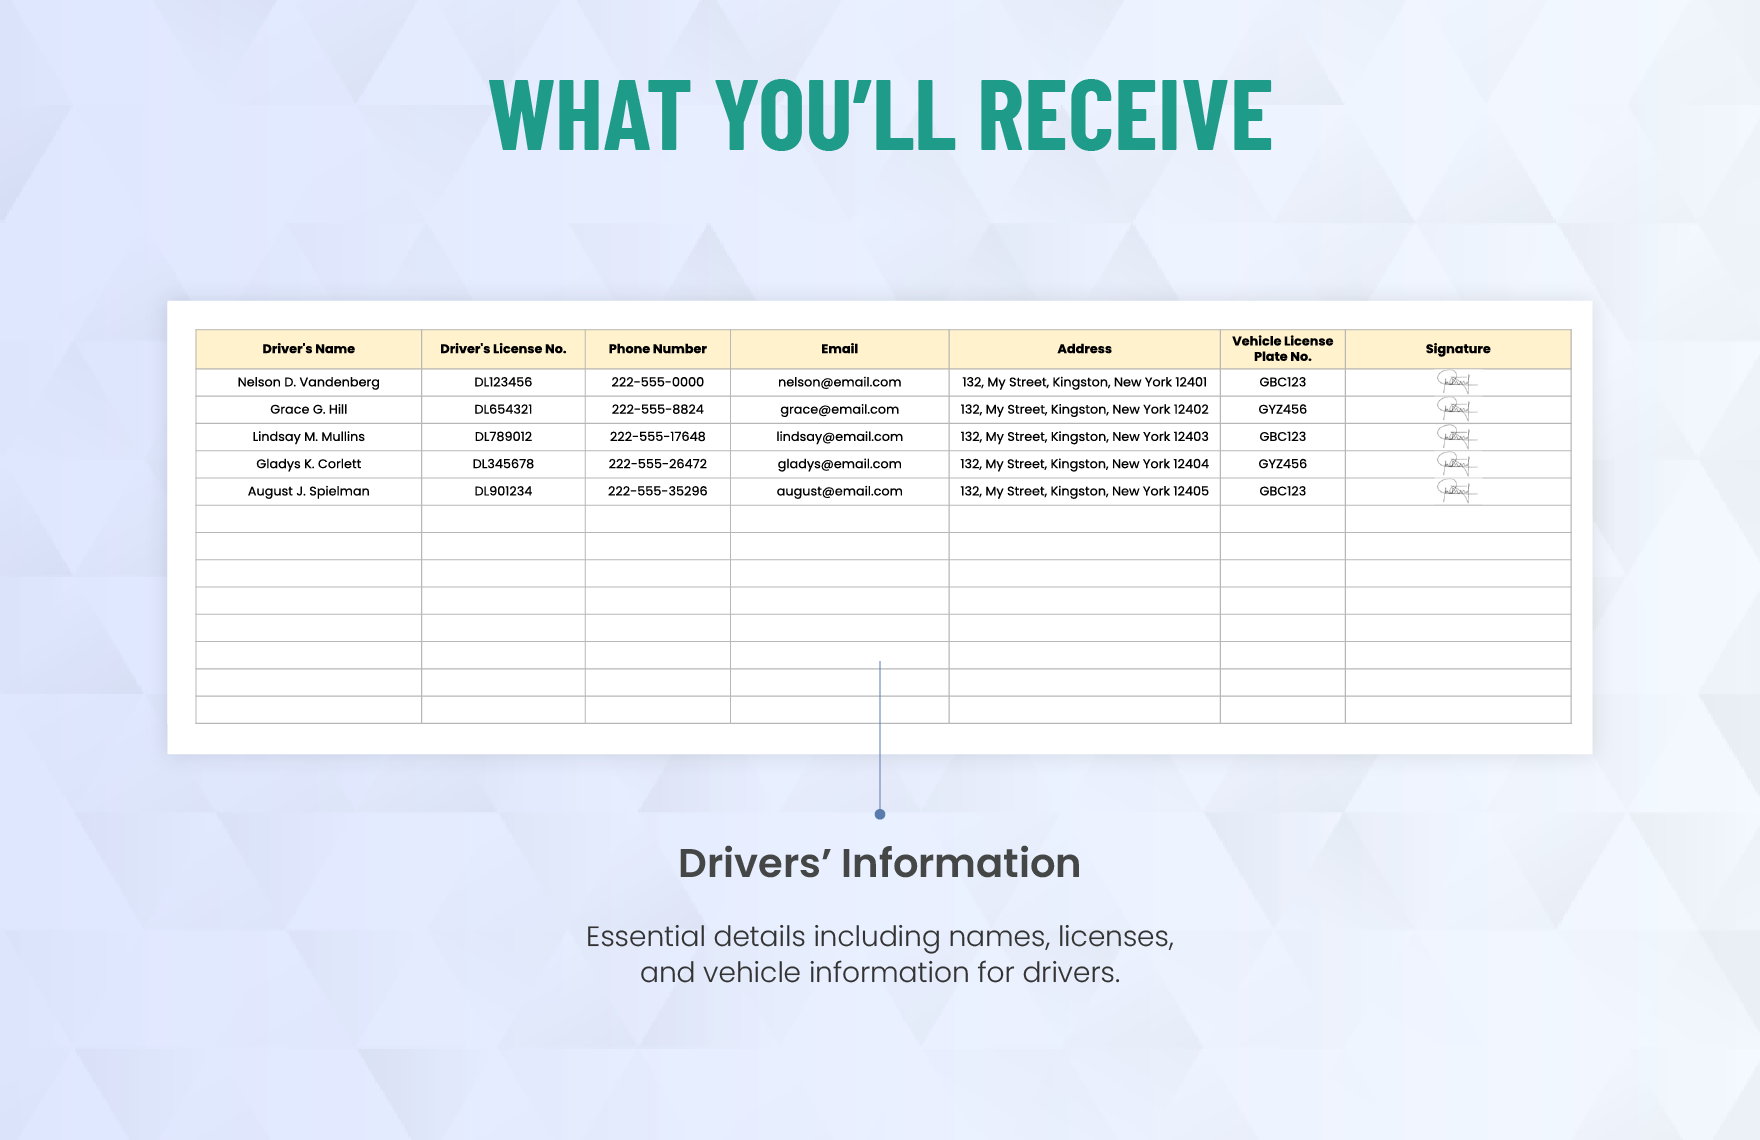 Driver Sign in Sheet Template